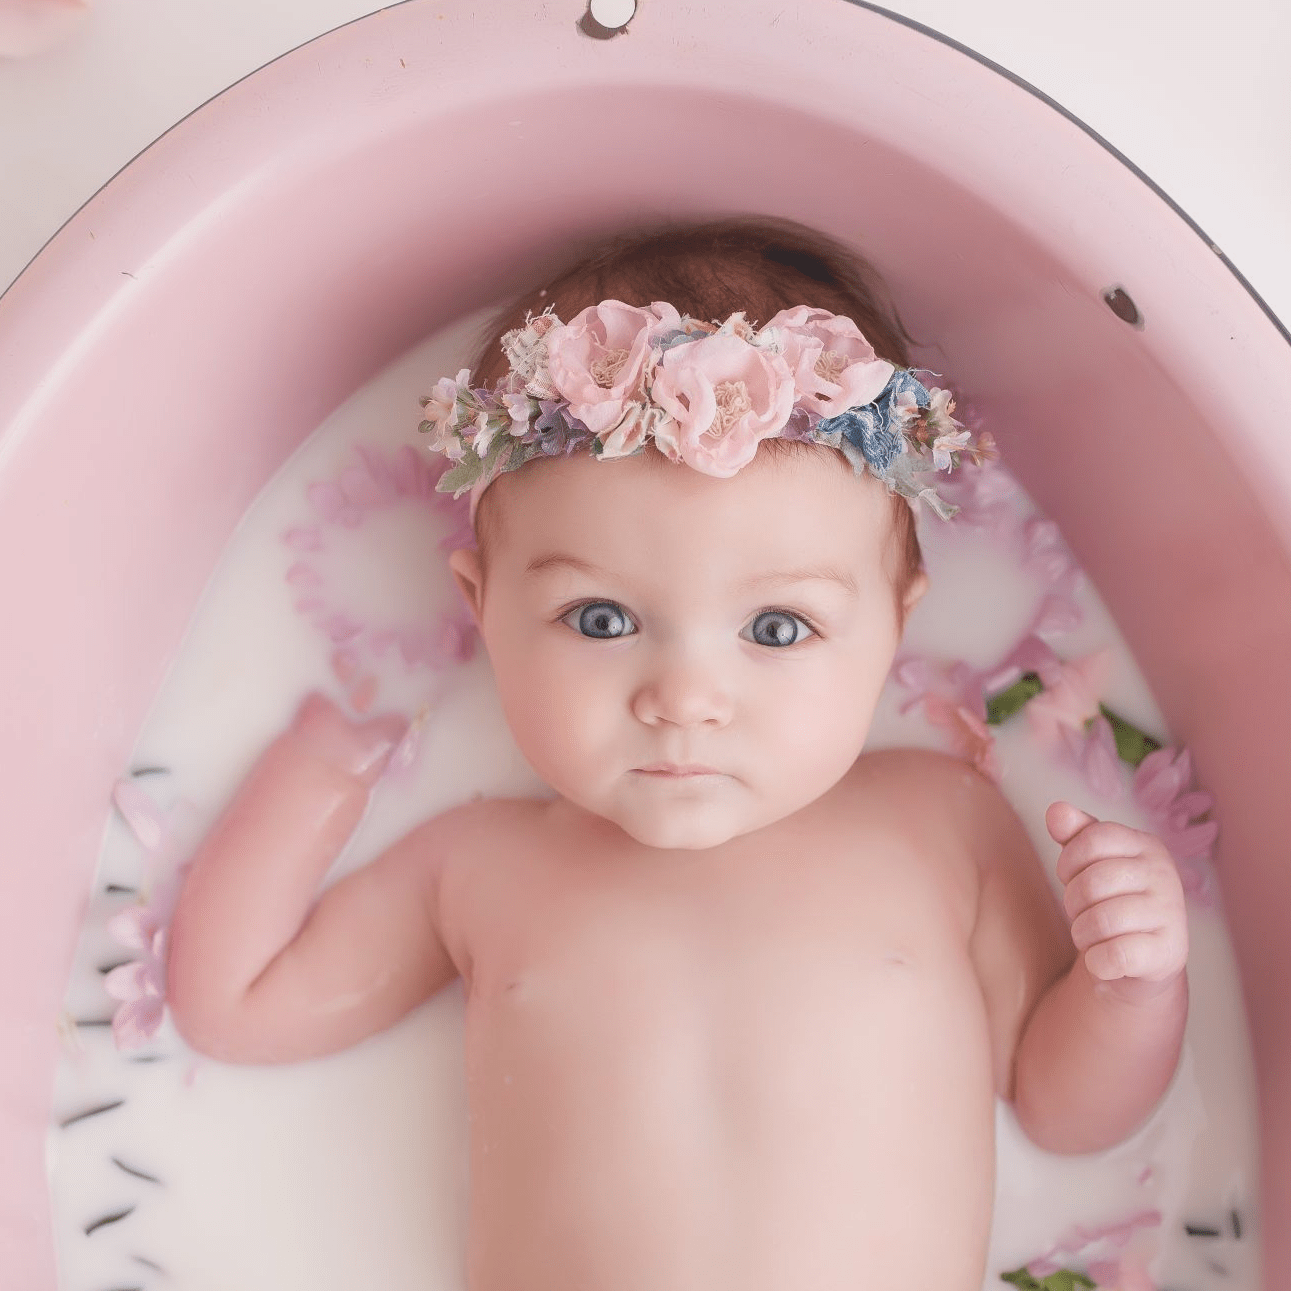 Can Babies Take Baths In Epsom Salt : Skin Brushing And Epsom Salt Baths Dana Dinnawi / An epsom salt bath contains magnesium and sulfate ions, which are absorbed into the body through the skin.